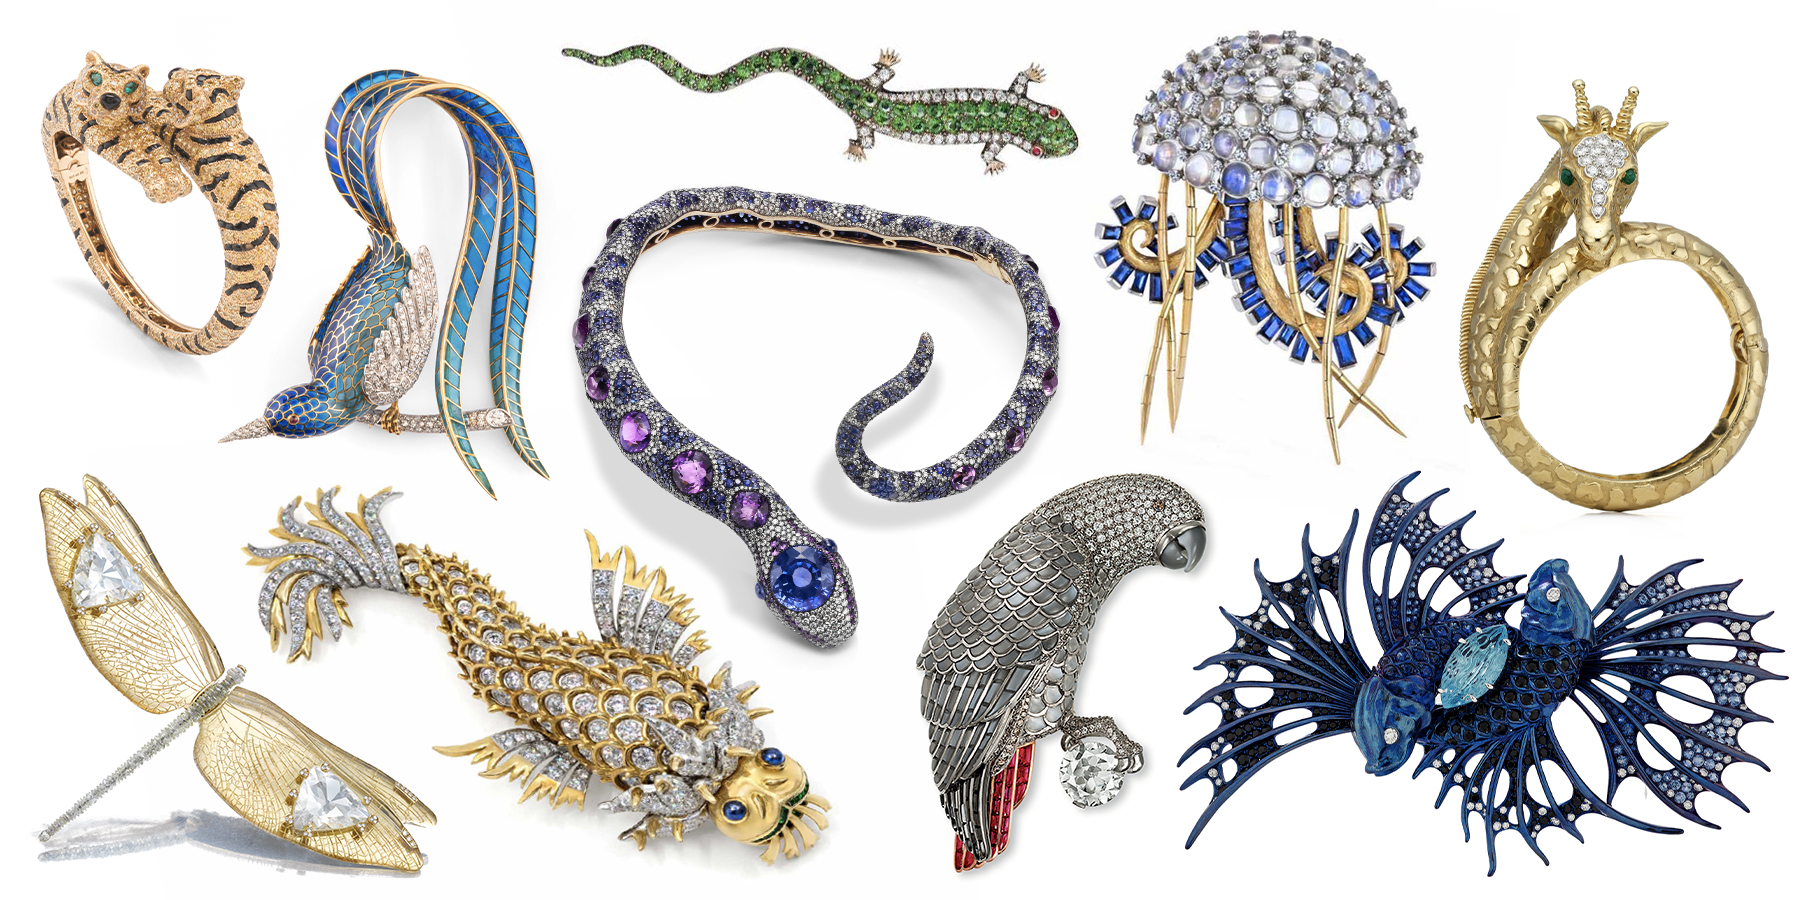 A bestiary of jewelry from the book Beautiful Creatures, by Marion Fasel